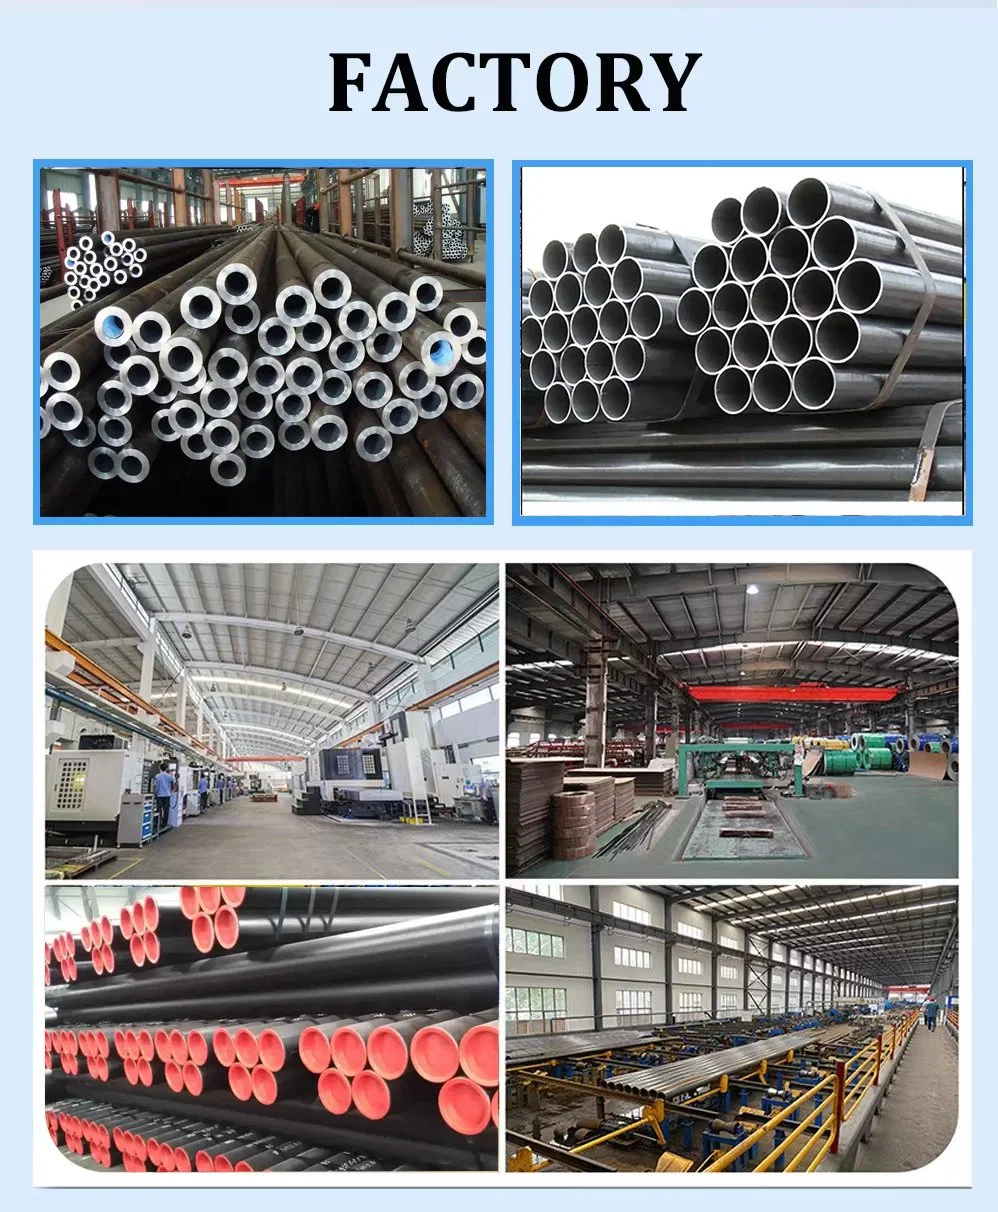 List Price Metal Tube Stainless Steel Pipe with AISI ASTM JIS Standard